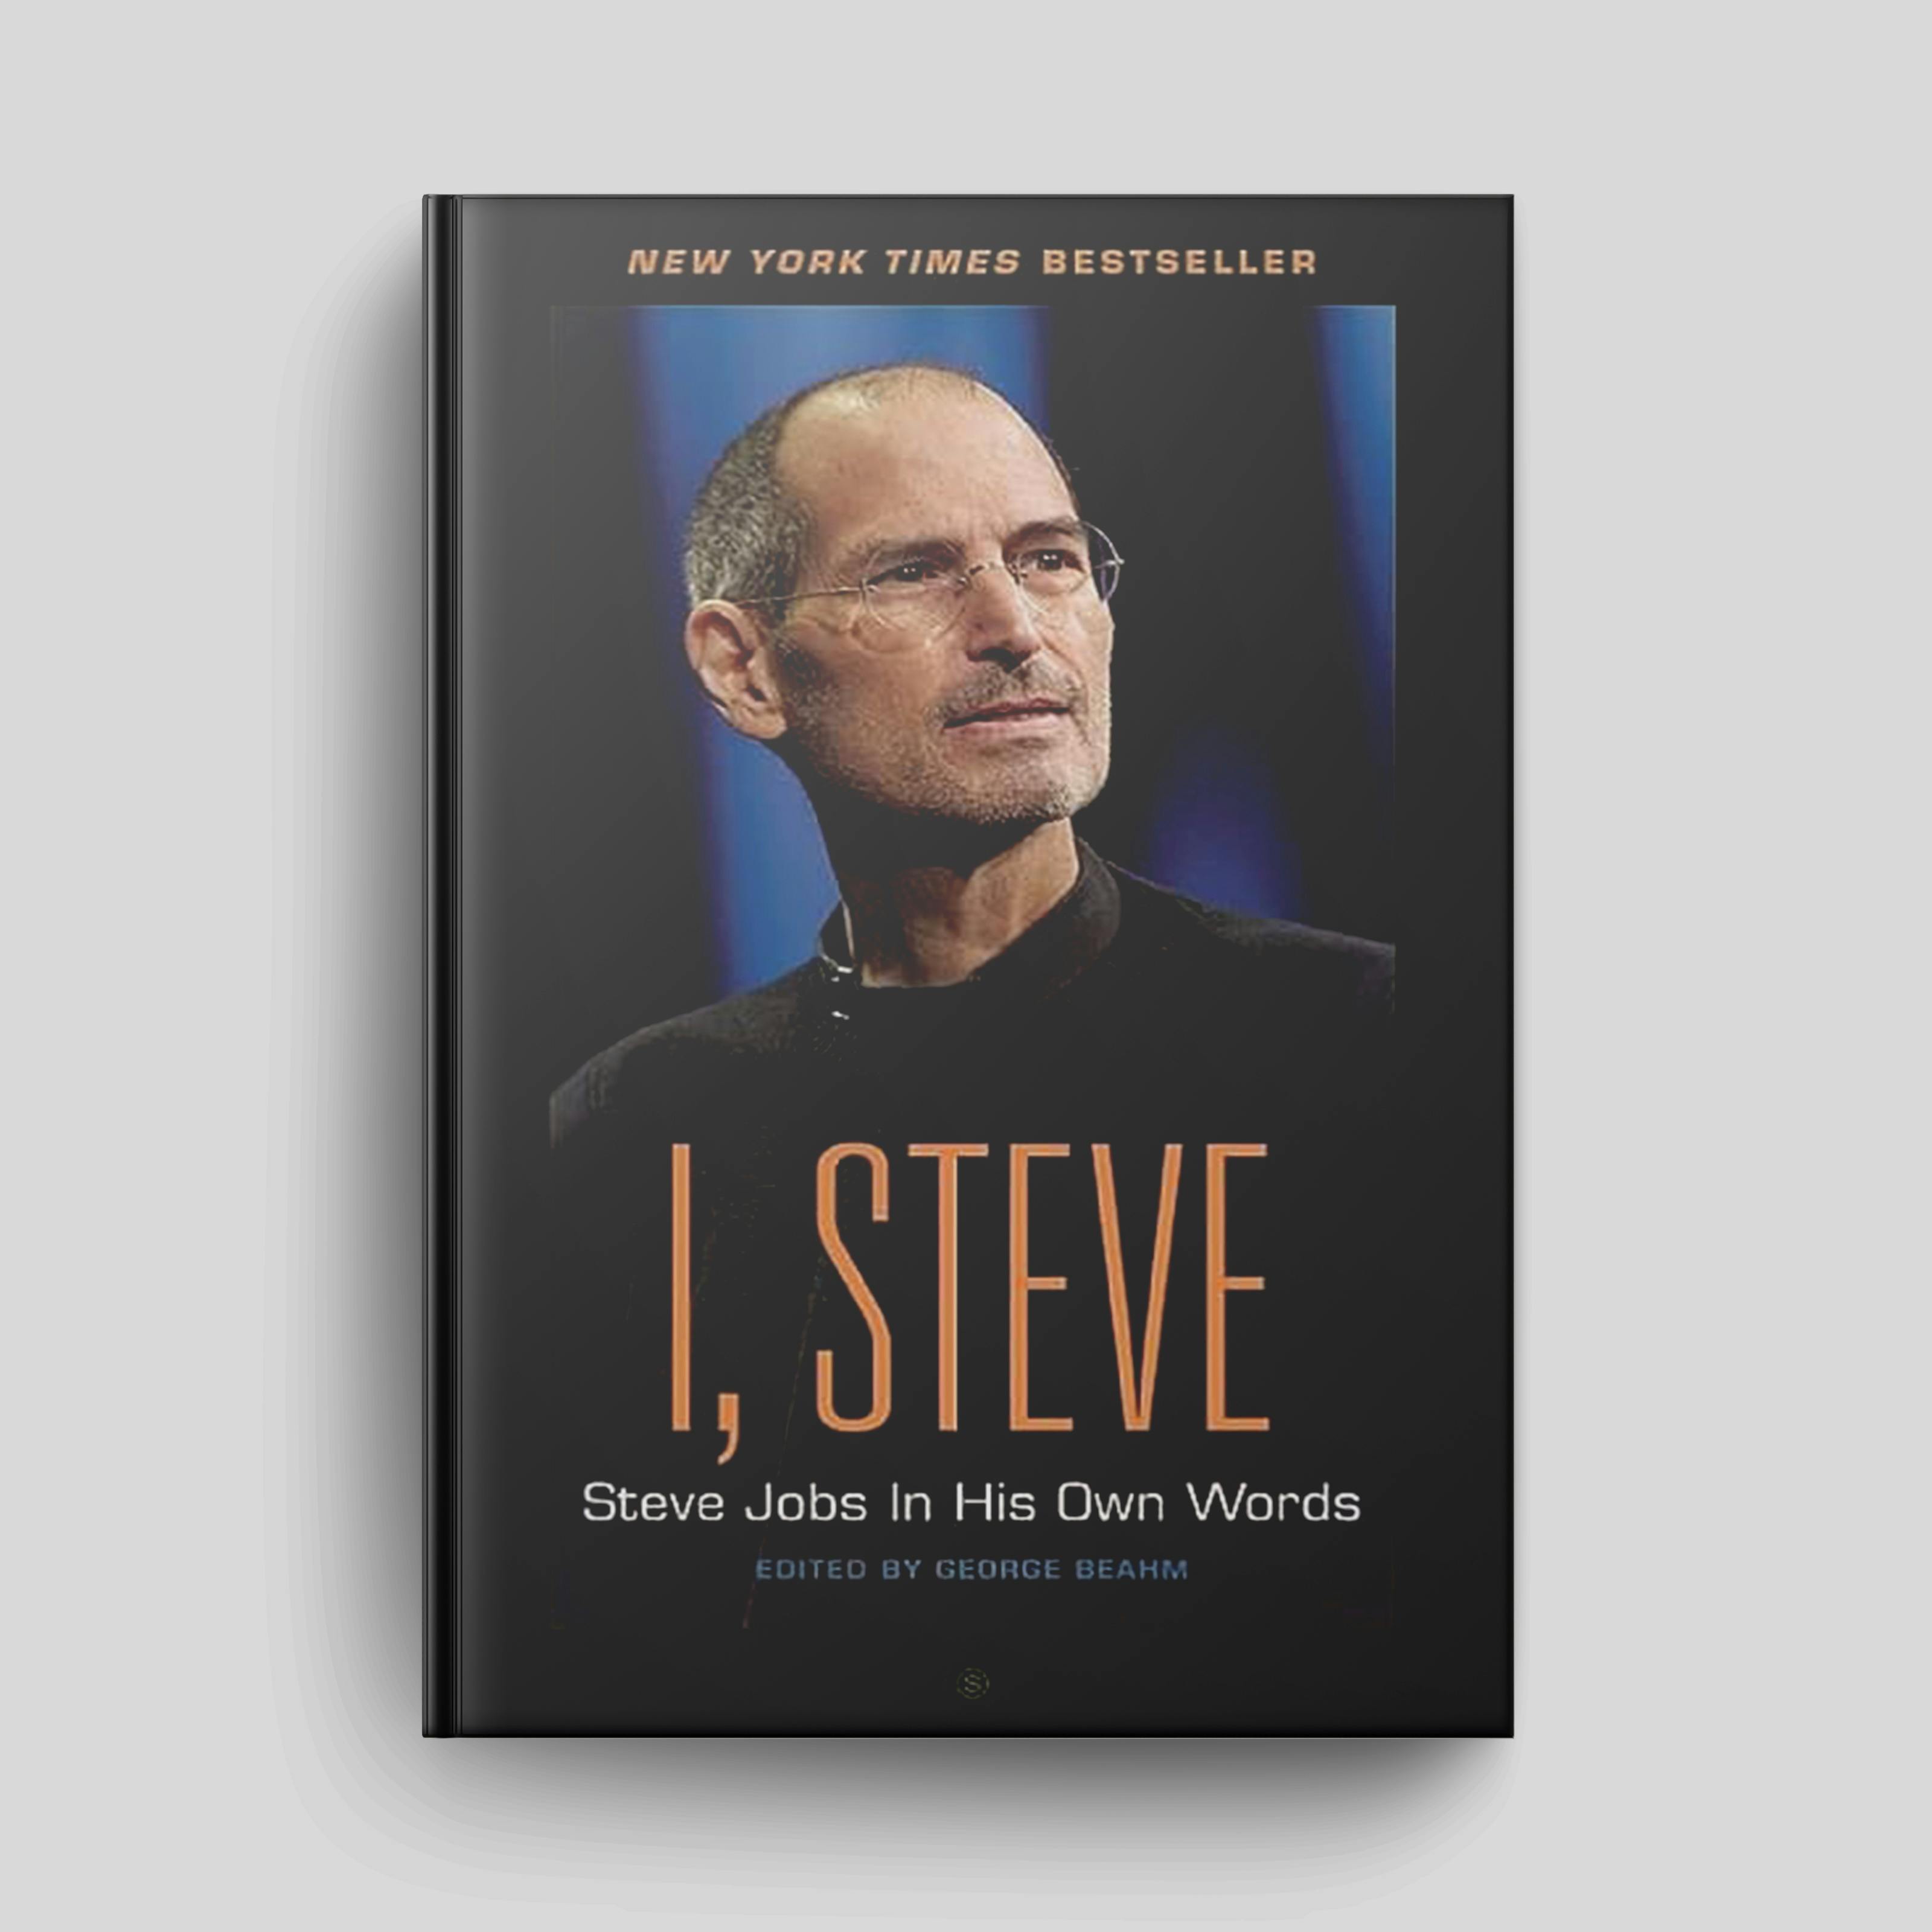 Book Breadown: ”I, Steve: Steve Jobs in his Own Words” by George Beahm | Episode #172 - Outliers with Daniel Scrivner